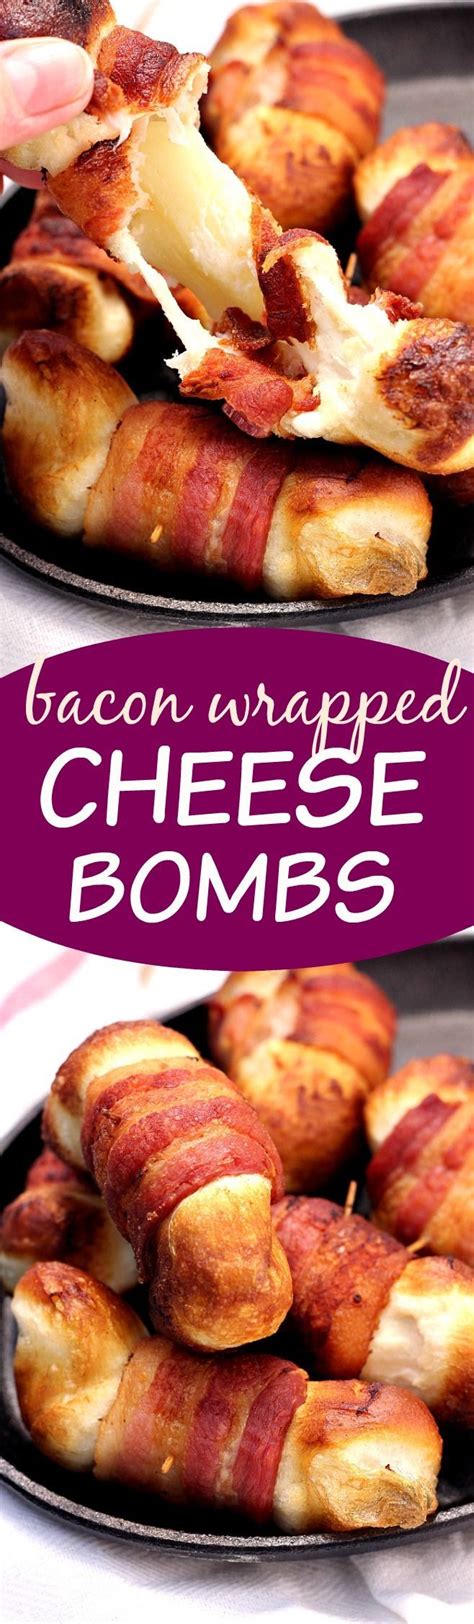 Bacon Wrapped Cheese Bombs - the appetizer that will make the party! Cheese filled biscuit bombs ...